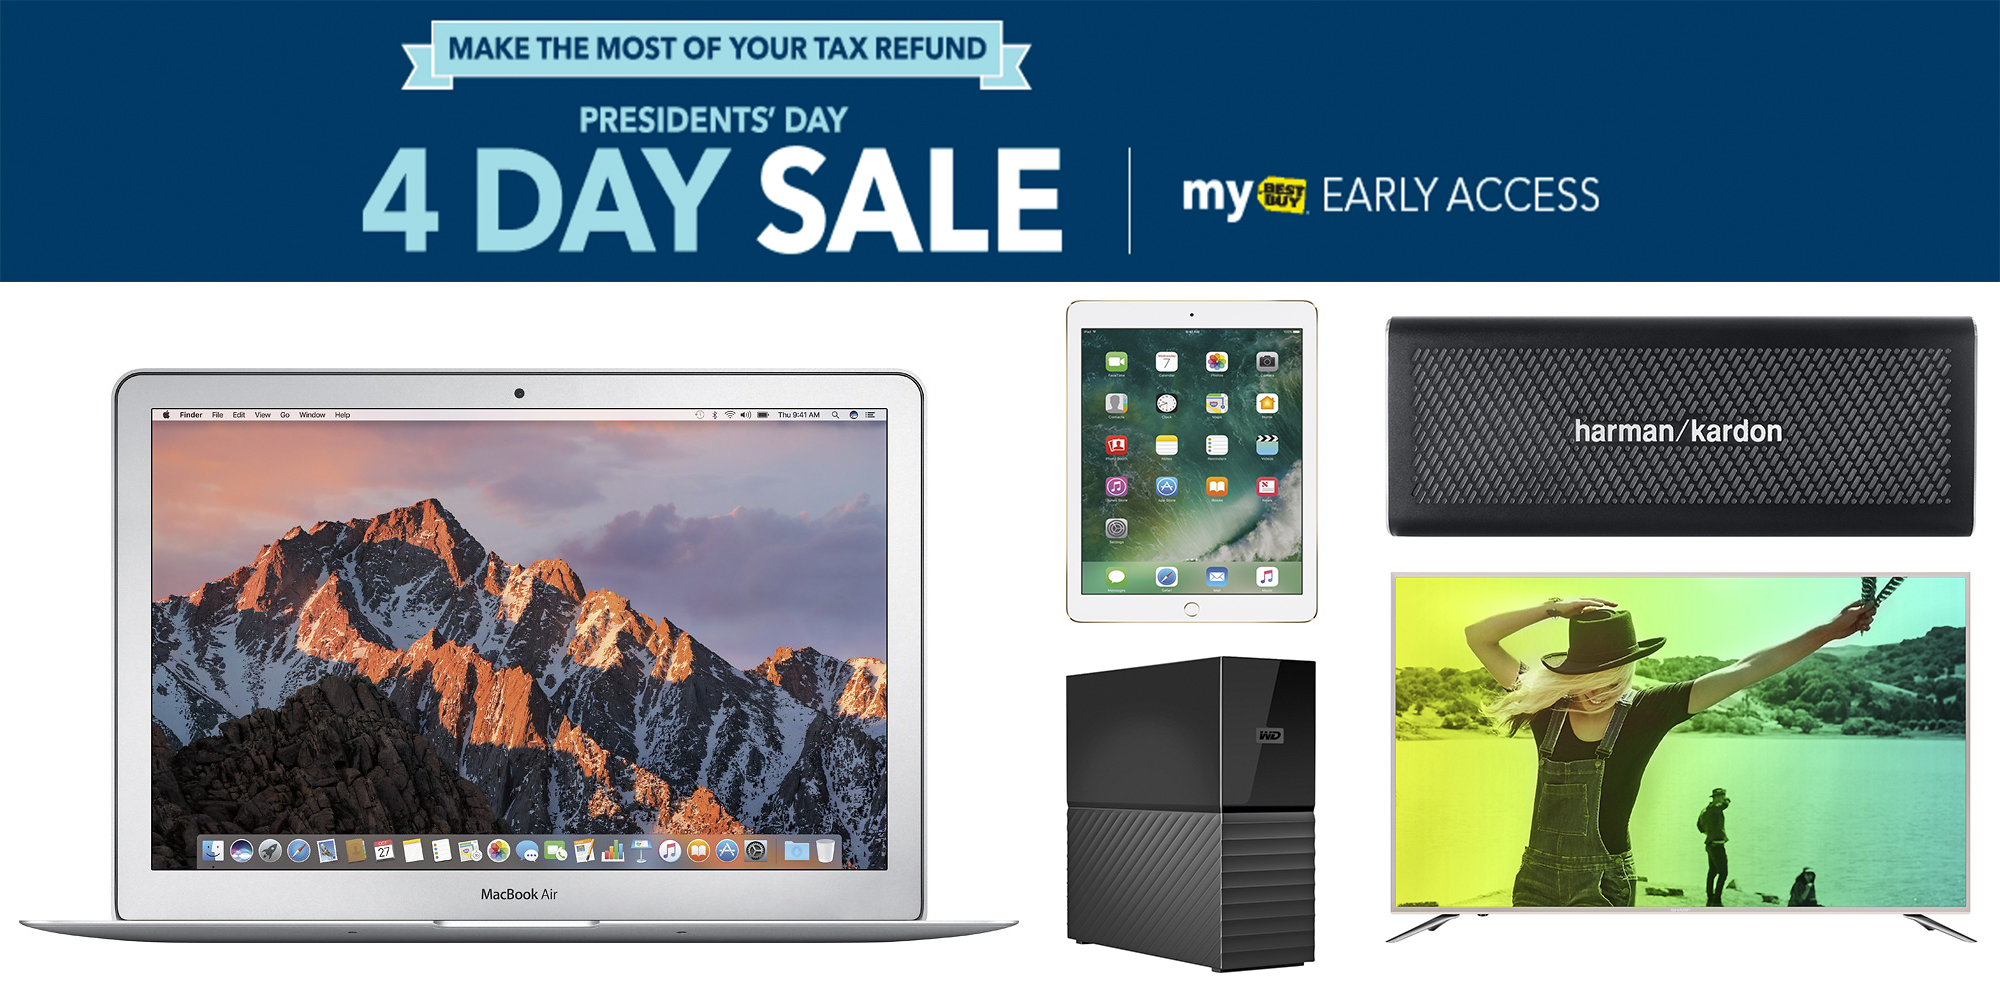 Best Buy President's Day Sale 275 off 13inch MacBook Air, iMac and